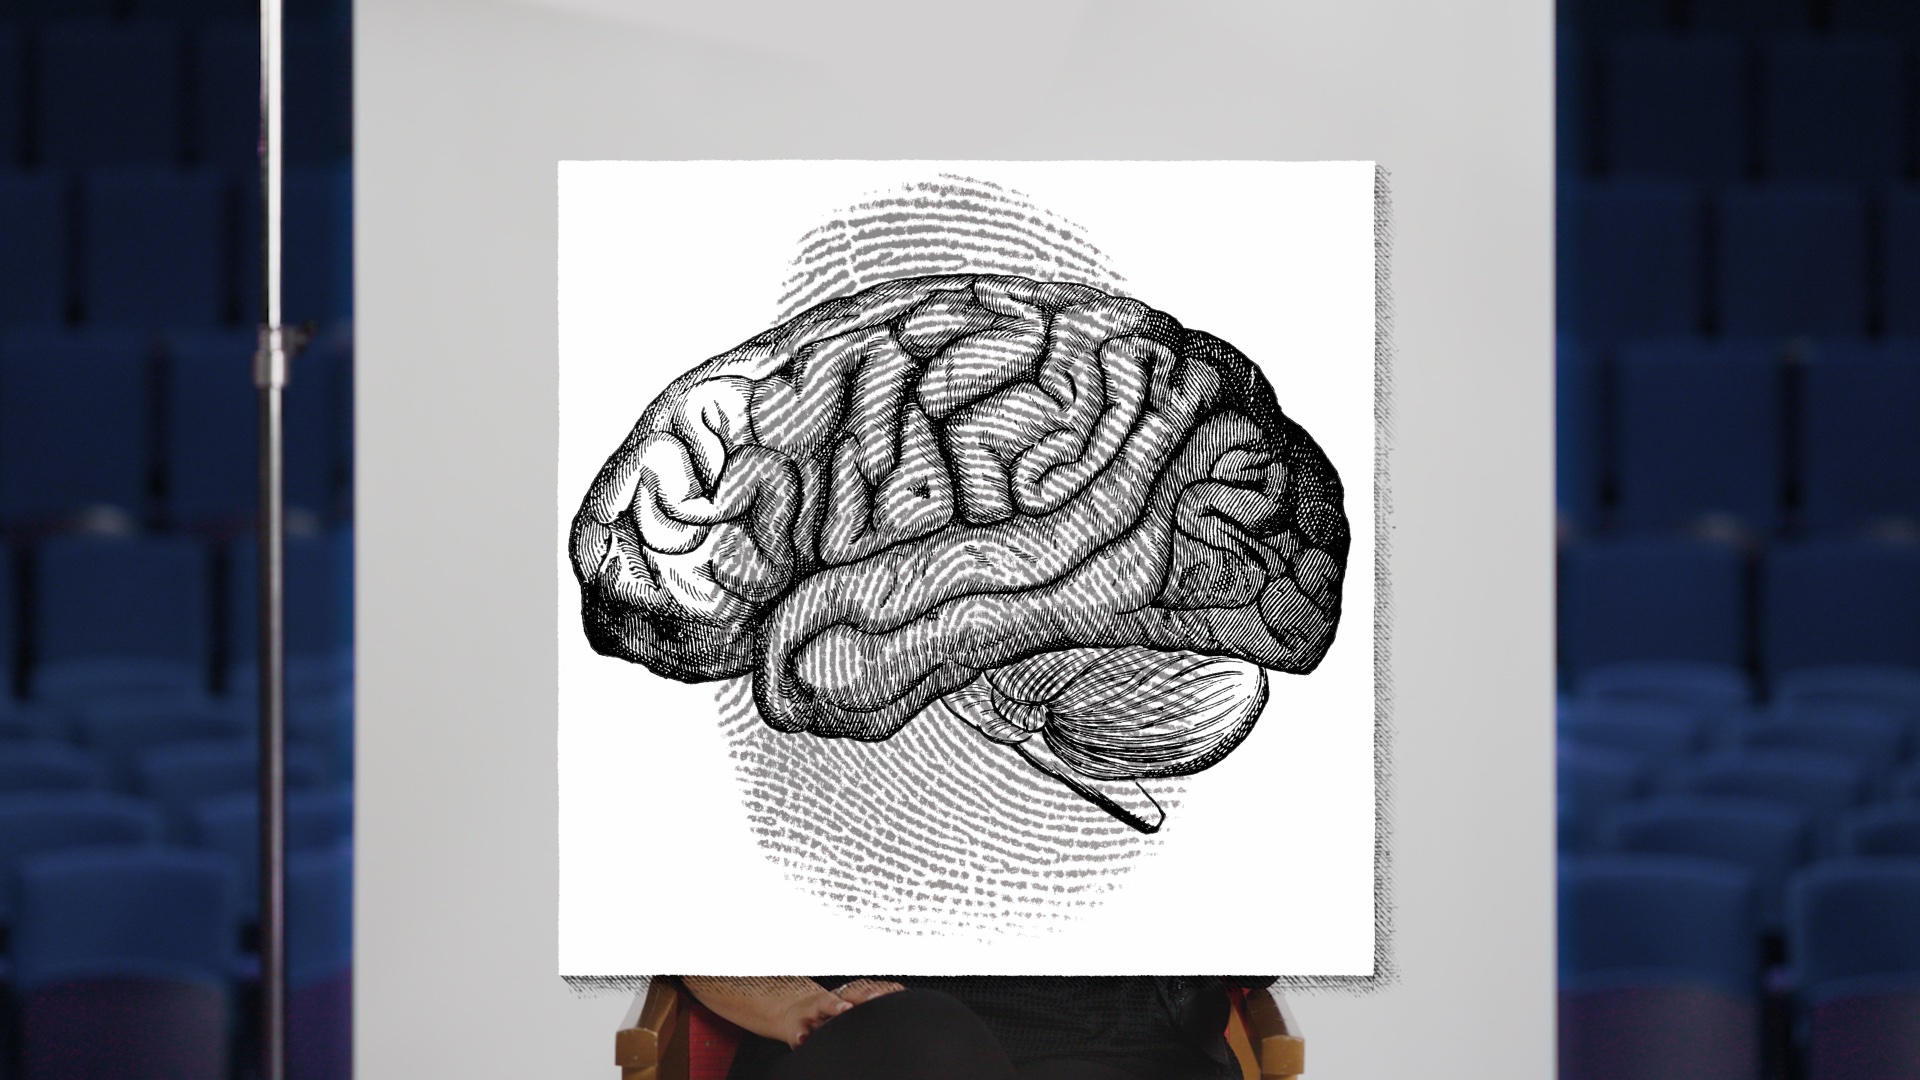 A poster with a drawing of a brain in front of an auditorium.